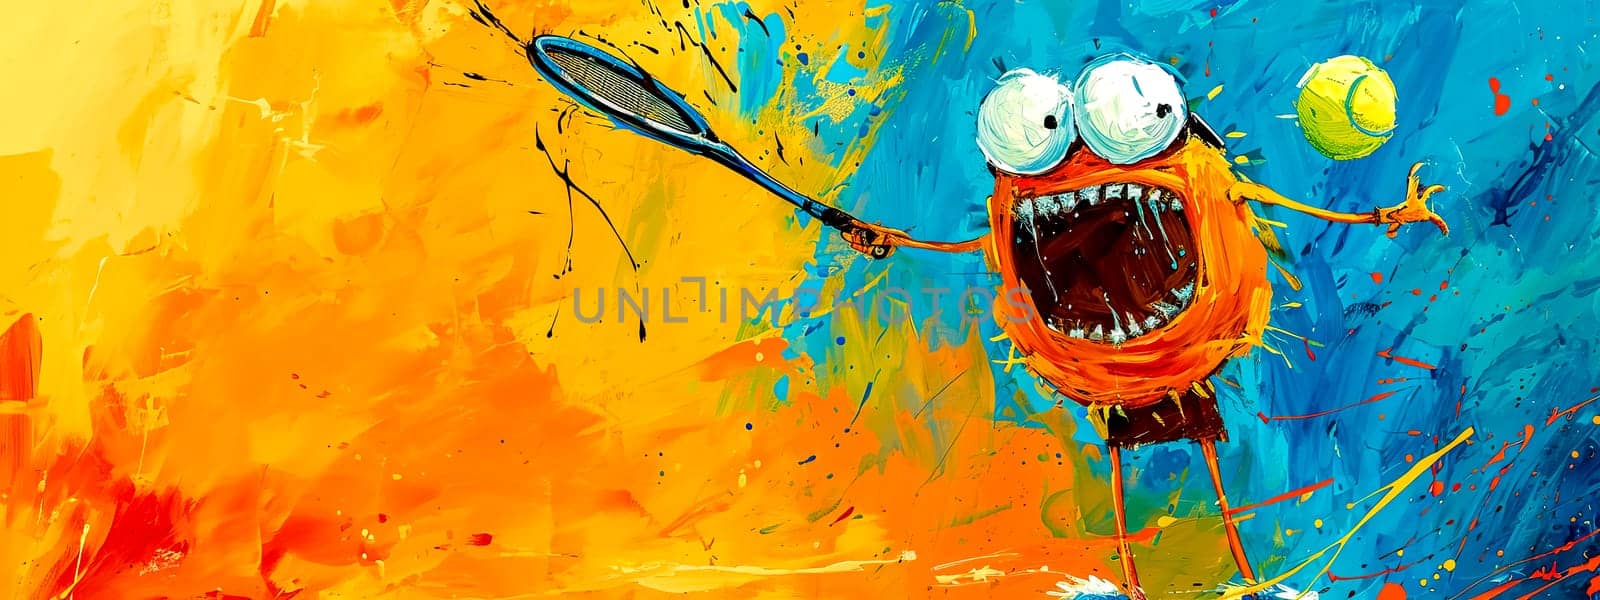 caricature of a tennis player with exaggerated features, mid-swing against a vibrant backdrop of splattered paint, symbolizing energy and movement.